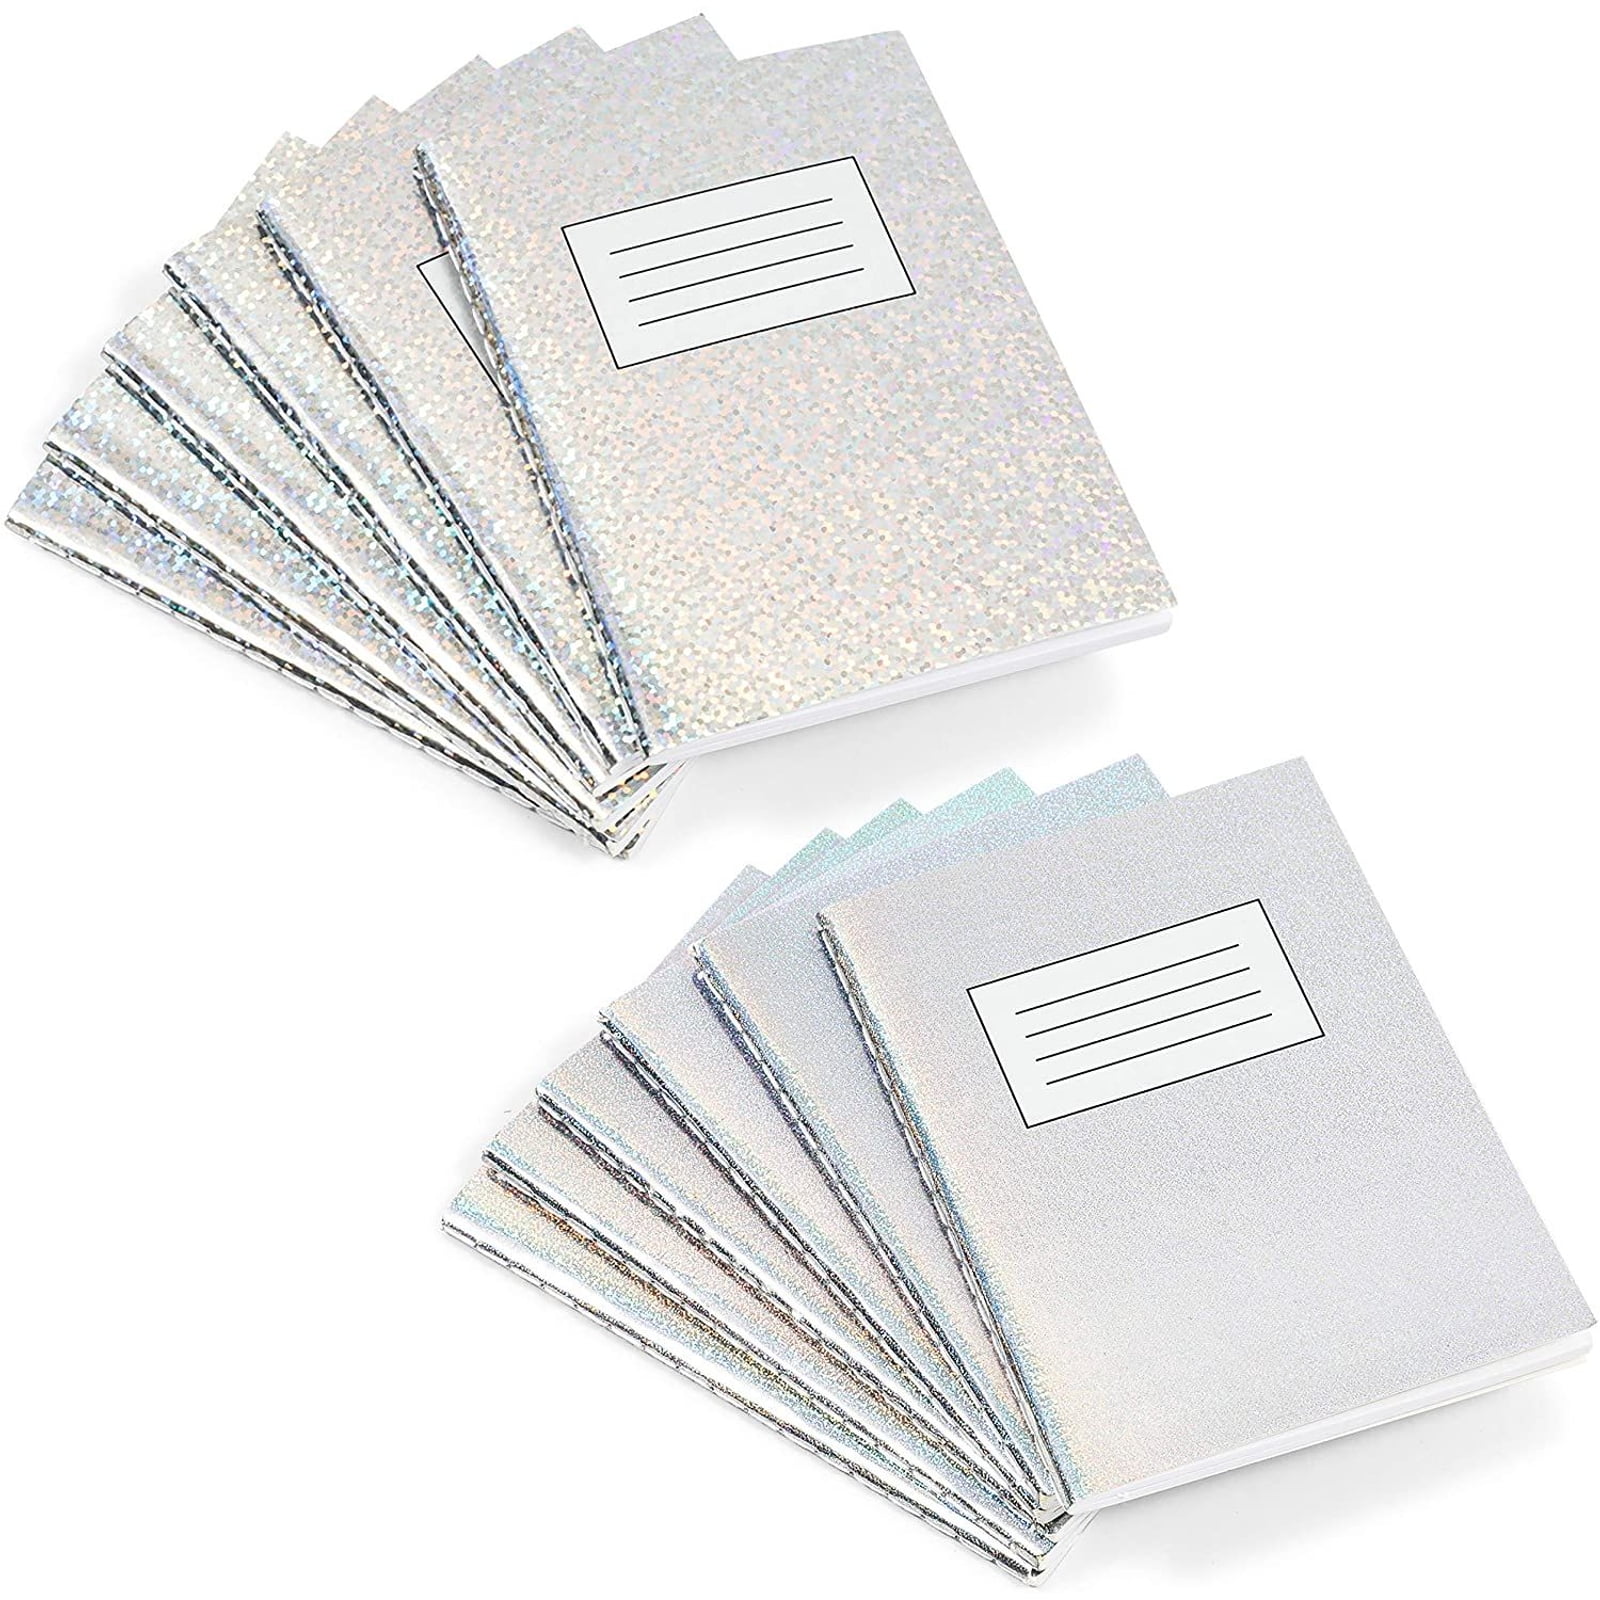 12 Pack Glitter Notebooks, Travel Journal for Work and Office Supplies, 3.25 x 4.5 in.